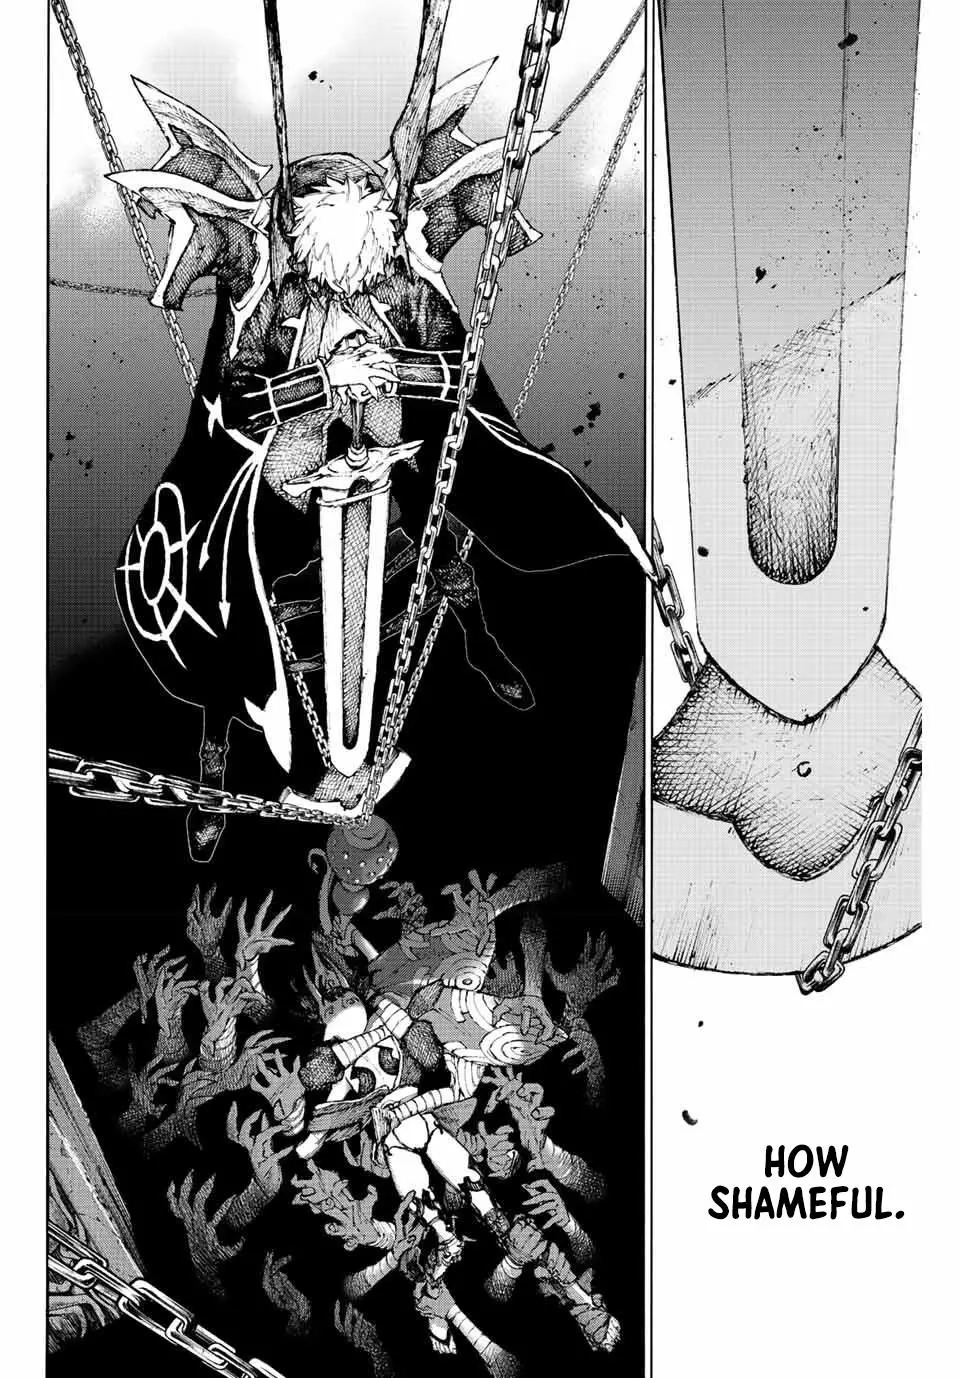 Fate/grand Order -Epic Of Remnant- Pseudo-Singularity Iii: The Stage Of Carnage, Shimousa - Seven Duels Of Swordmasters - 35 page 13-62f2d8dd